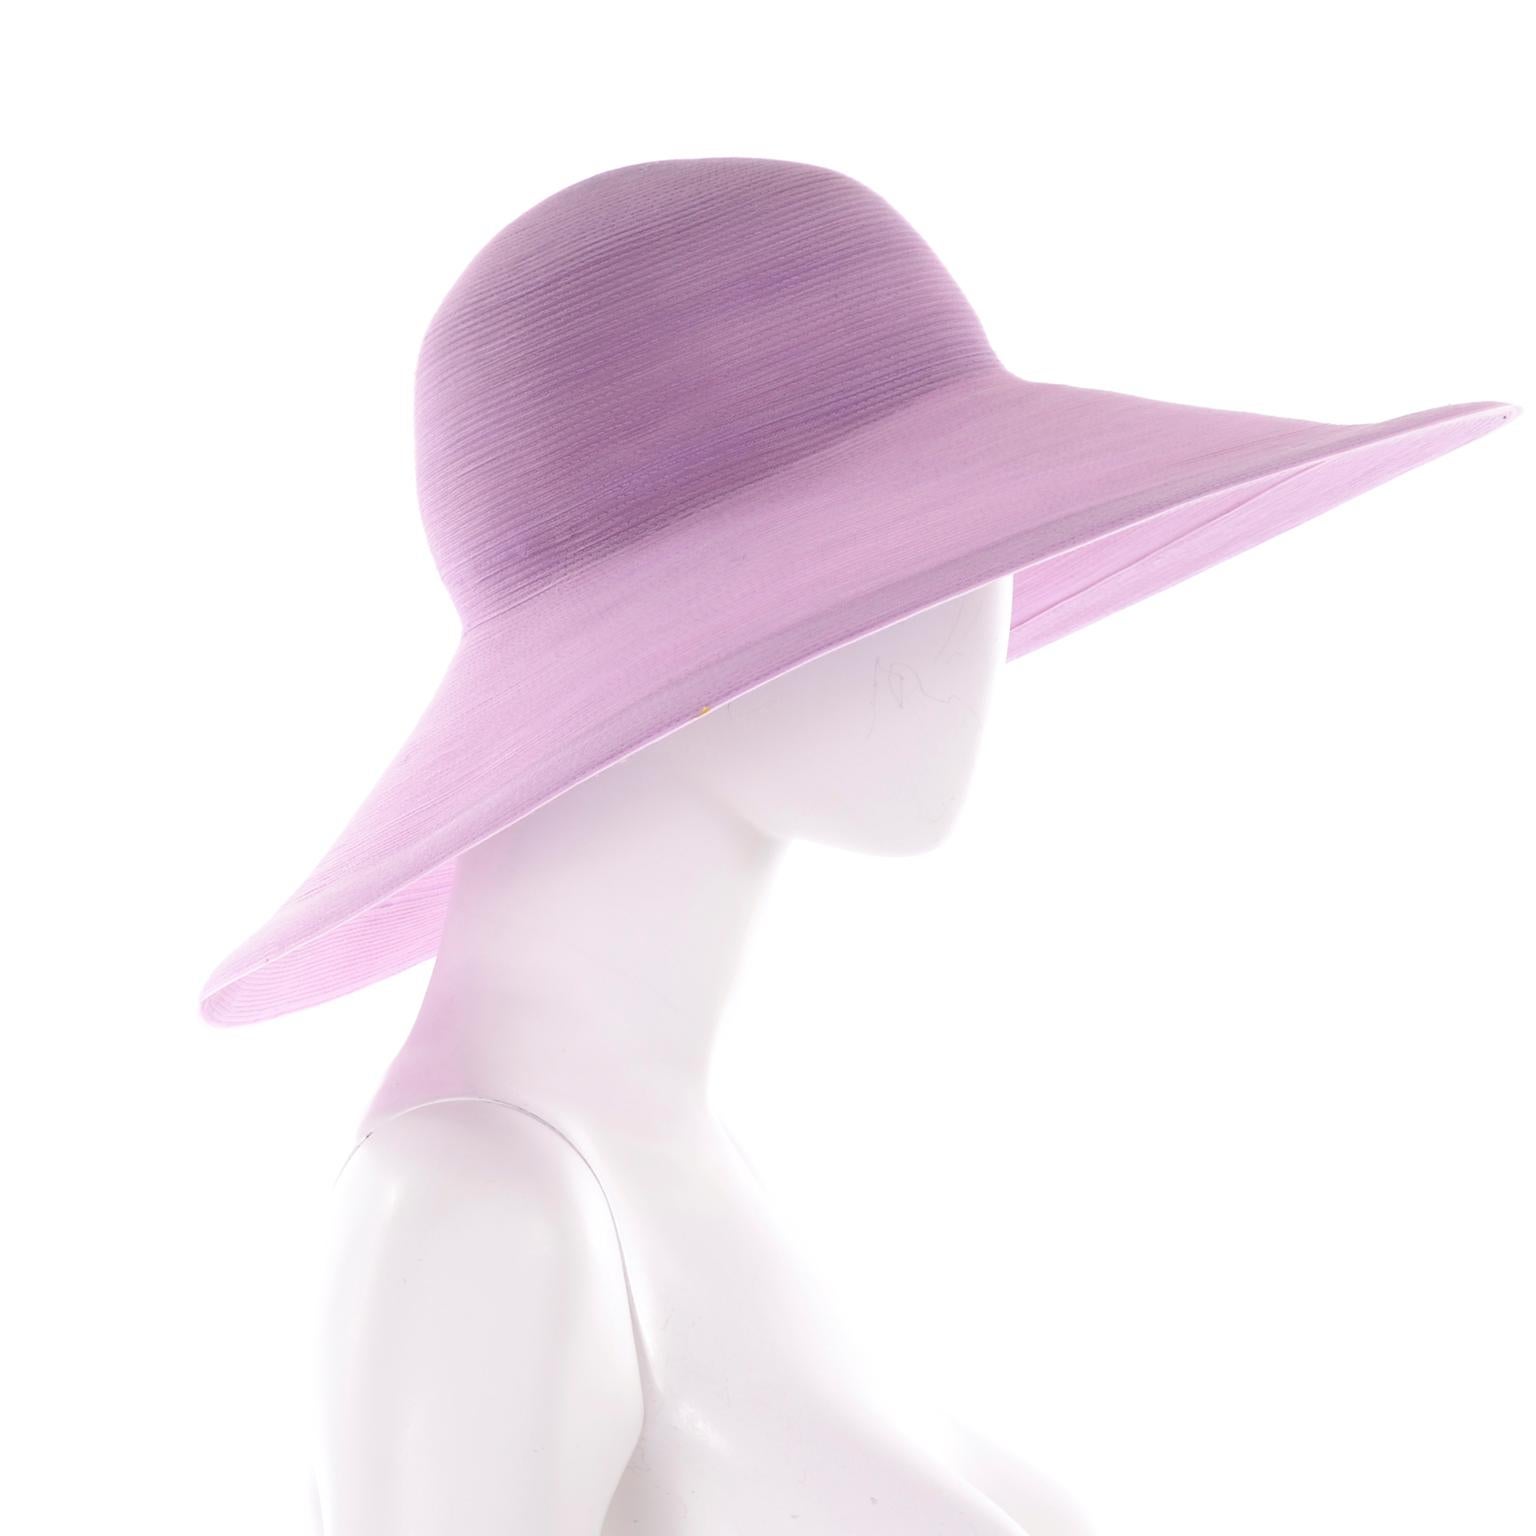 Vintage Purple Woven Patricia Underwood Wide Brim Sun Hat In Excellent Condition For Sale In Portland, OR